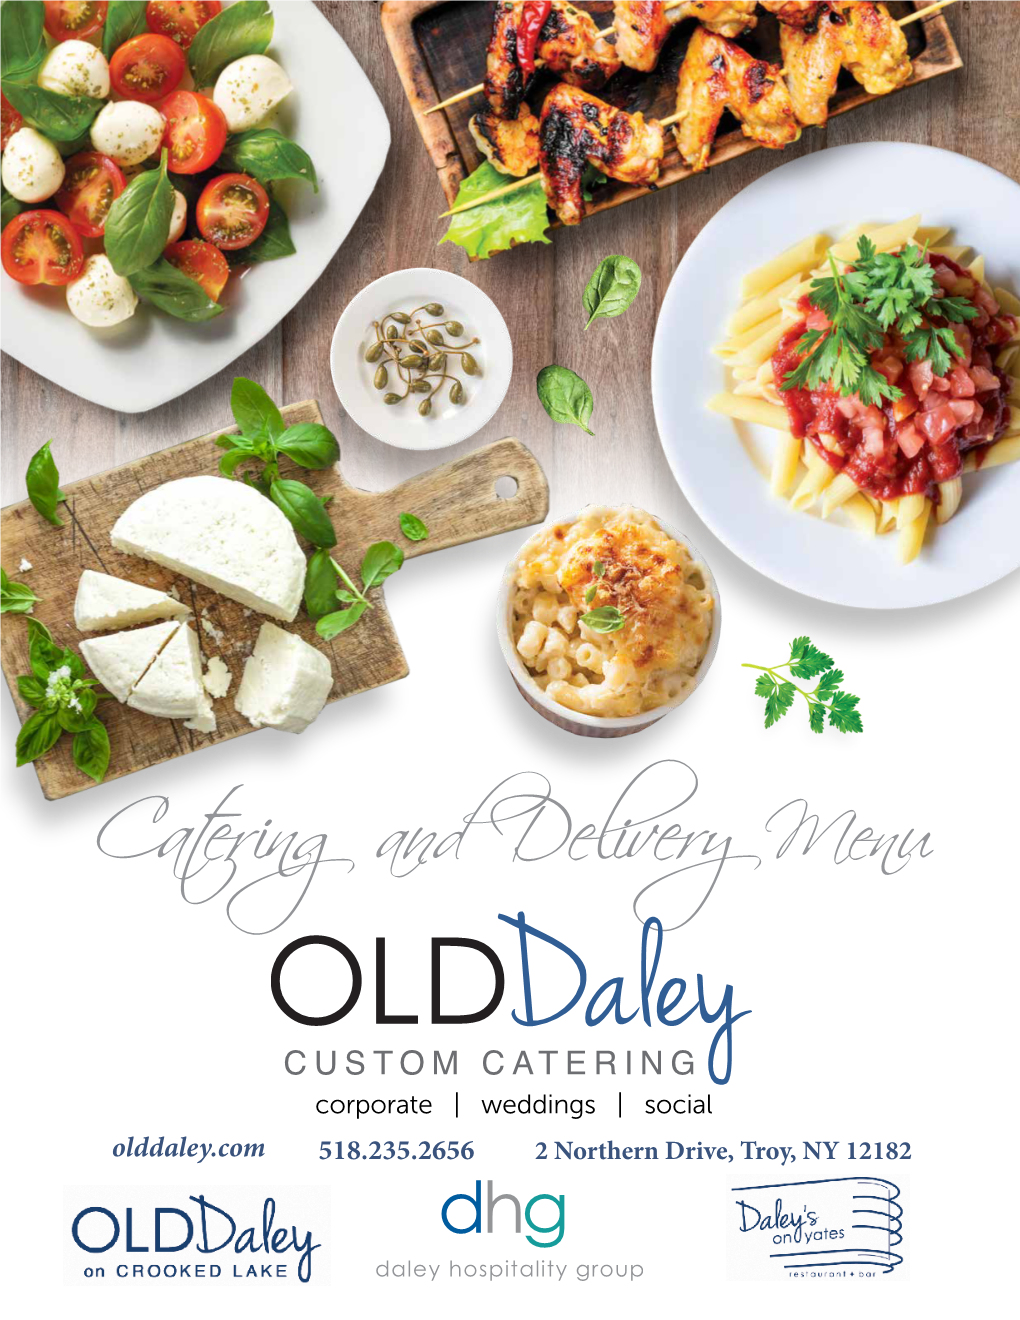 Catering and Delivery Menu